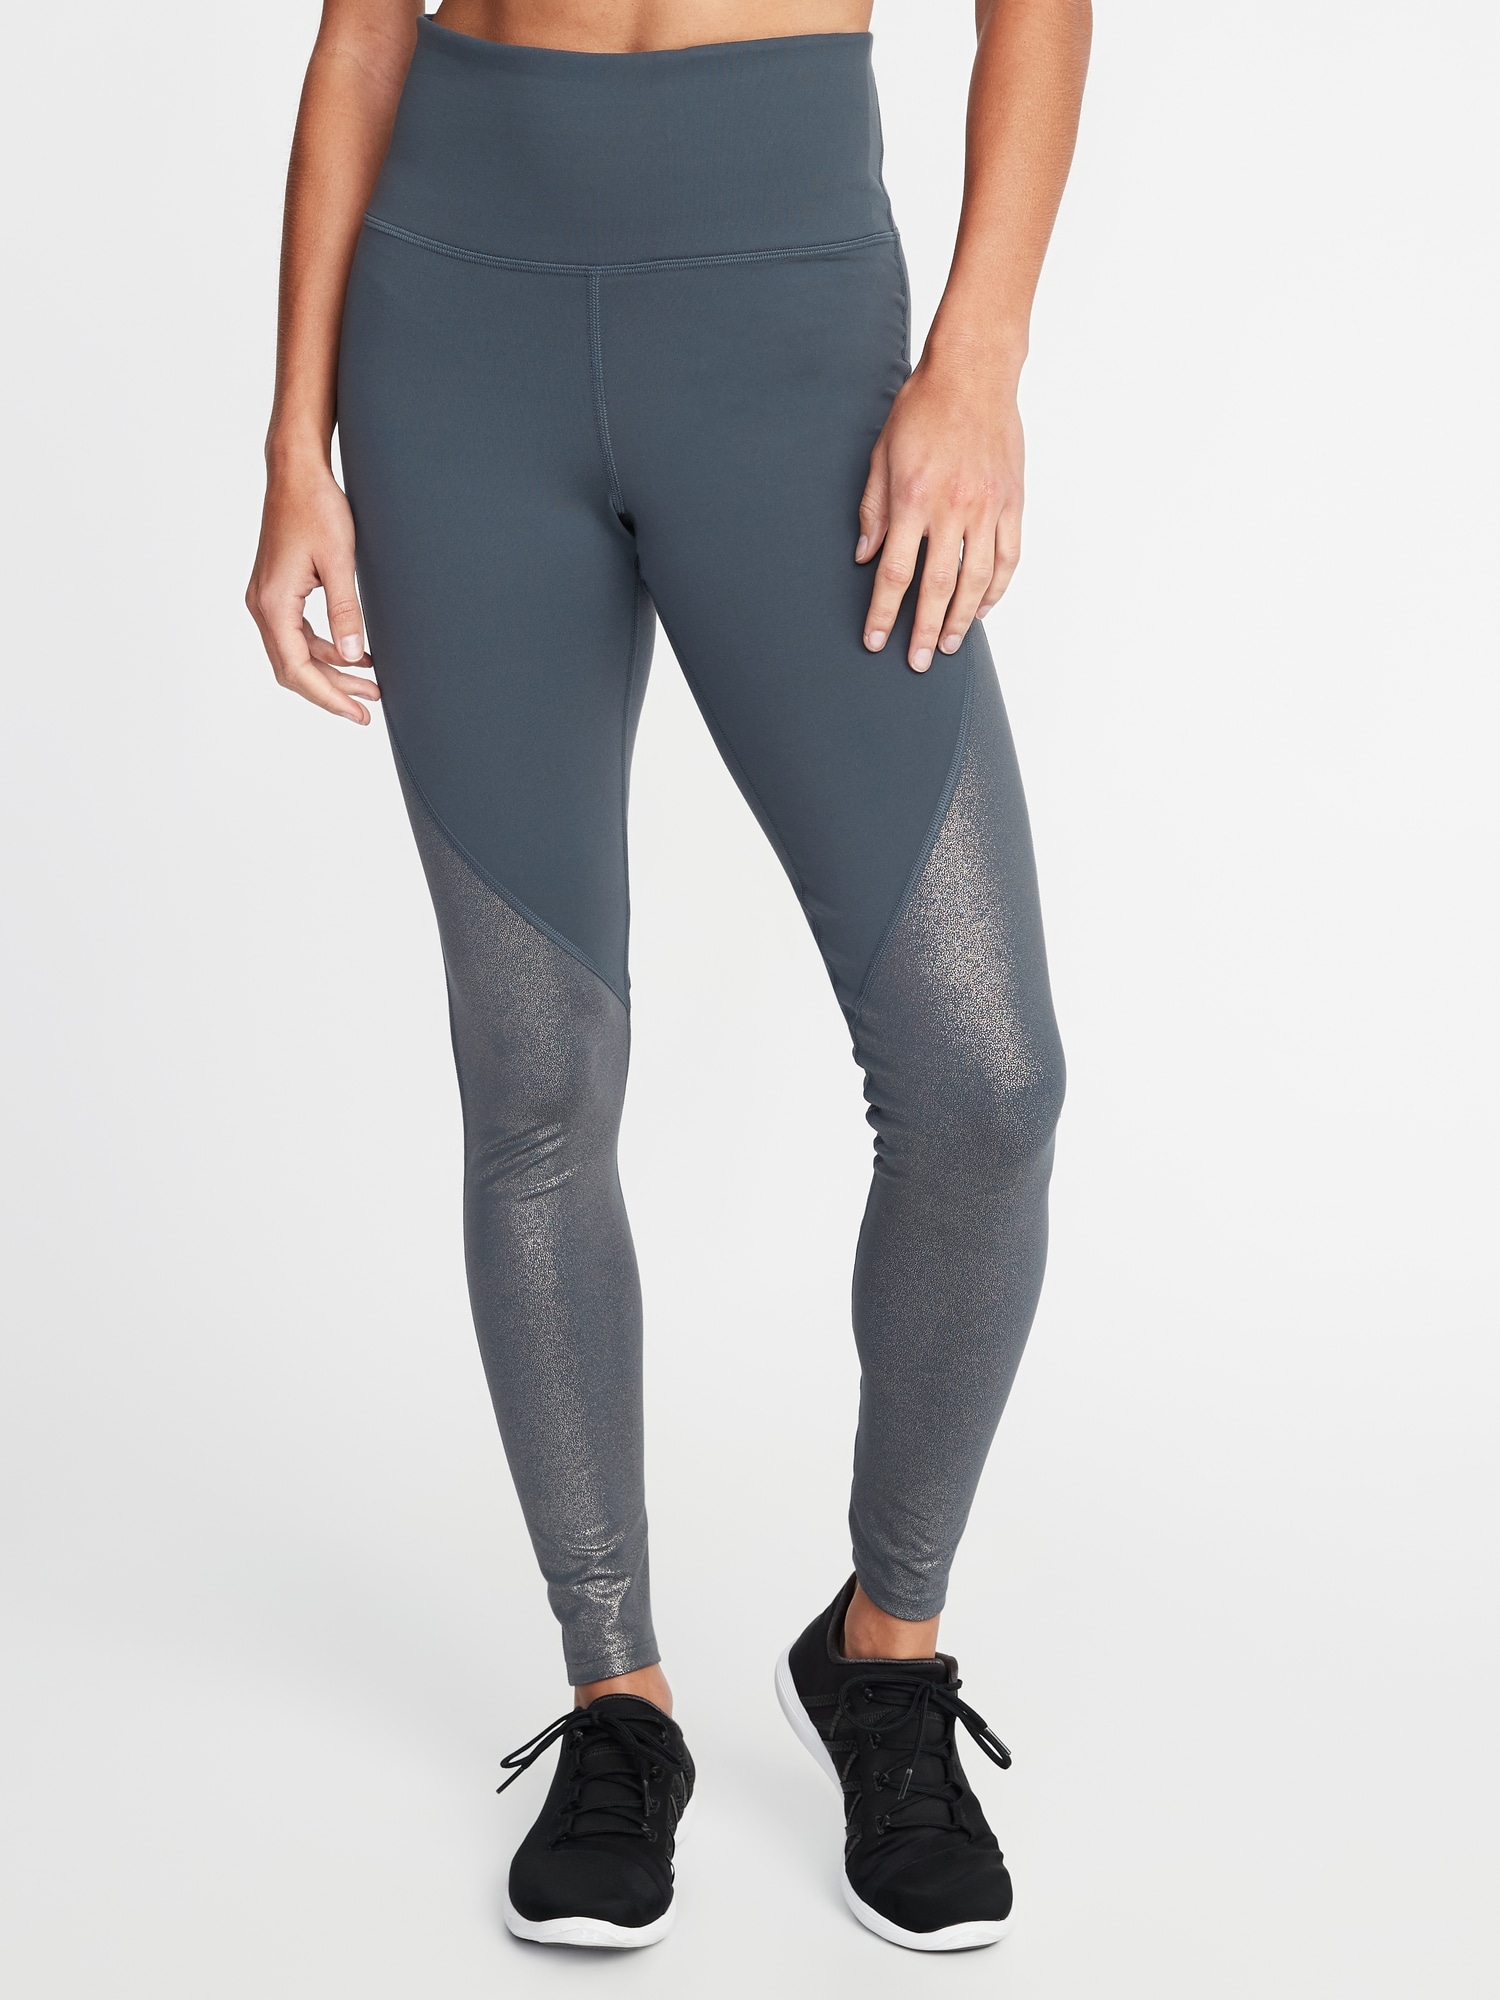 Old Navy Go-Dry Gray Metallic Shimmery Active Athleisure Workout